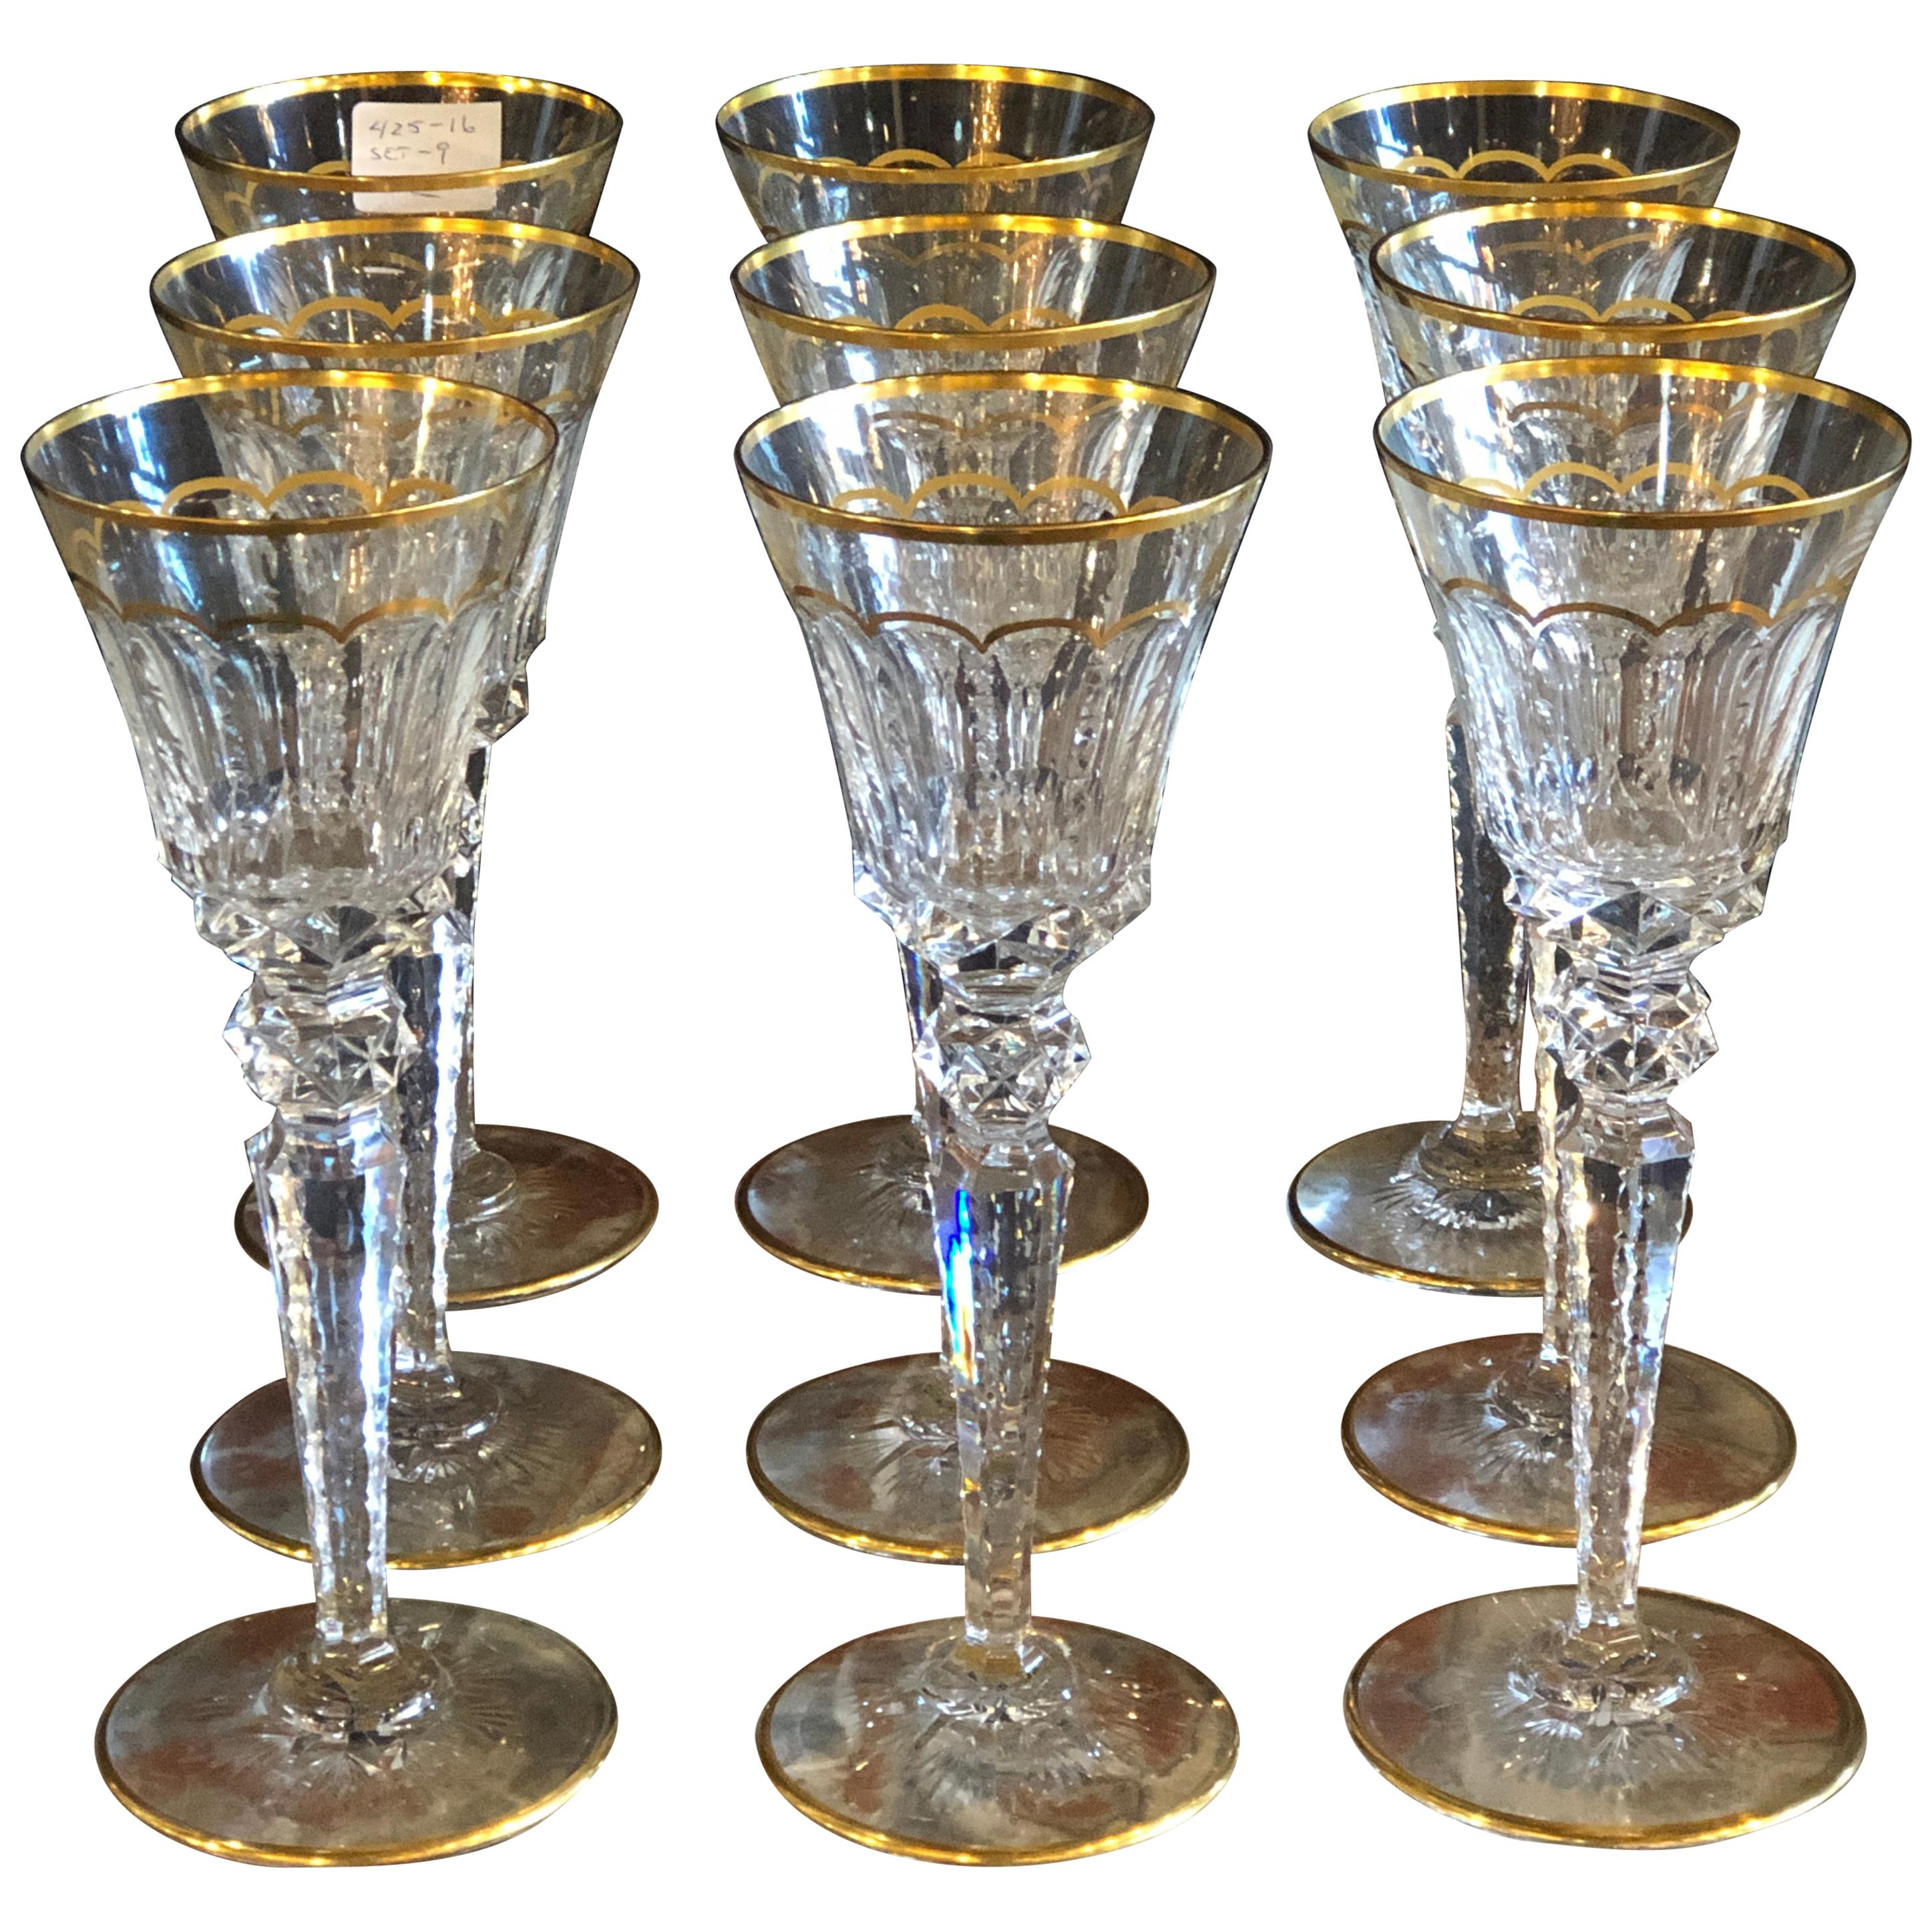  Nine St Louis Crystal Wine Glasses Mouth Blown & Hand Engraved Large Sized